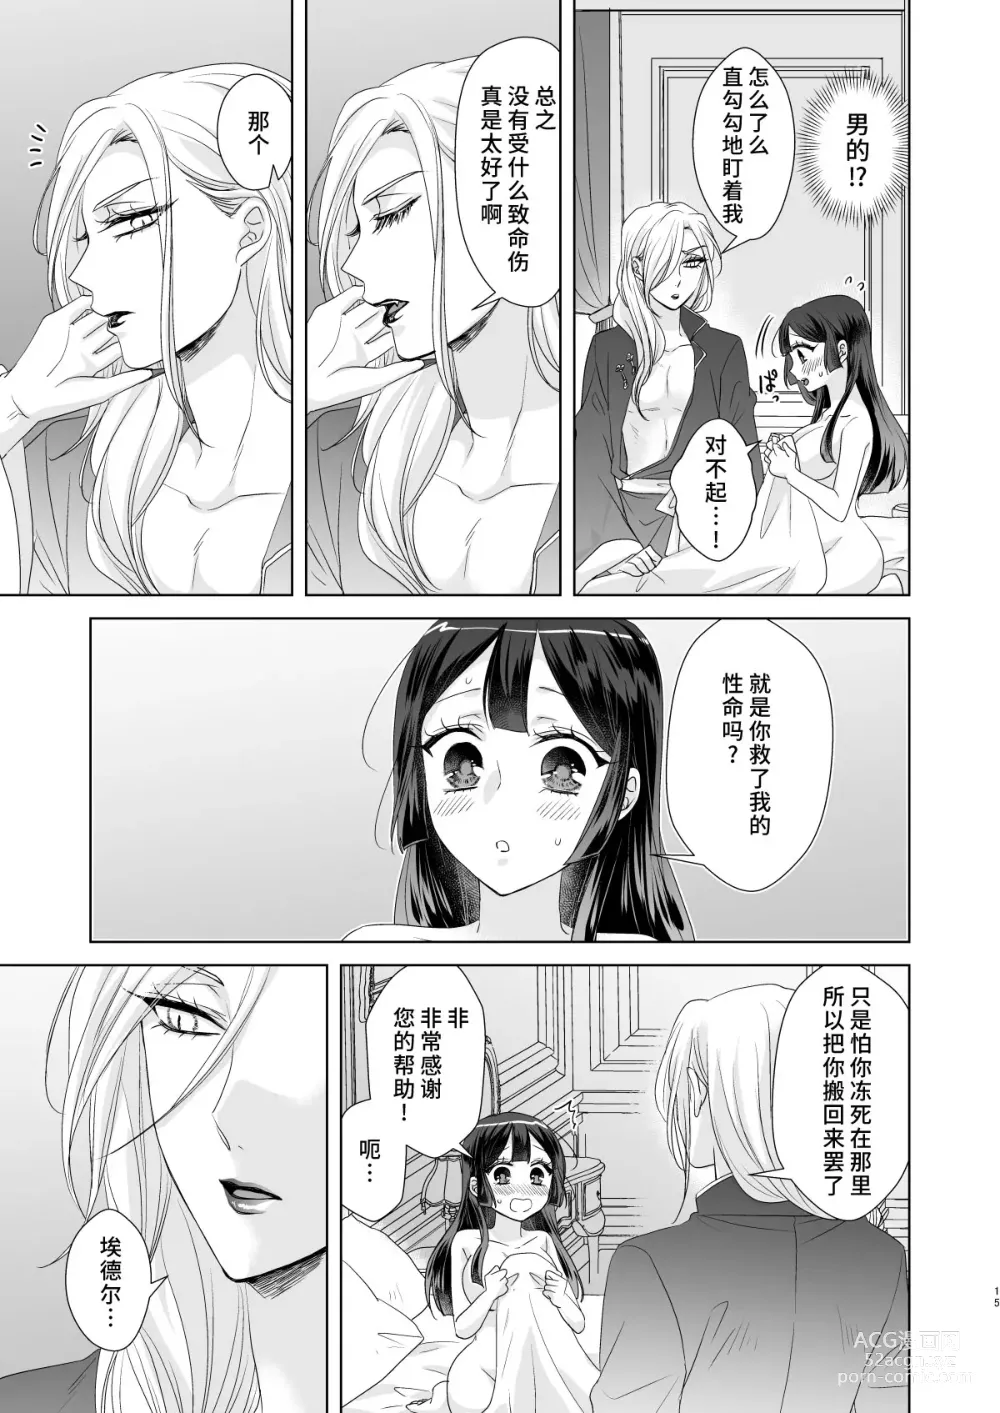 Page 14 of doujinshi 男大姐♂吸血鬼和少女